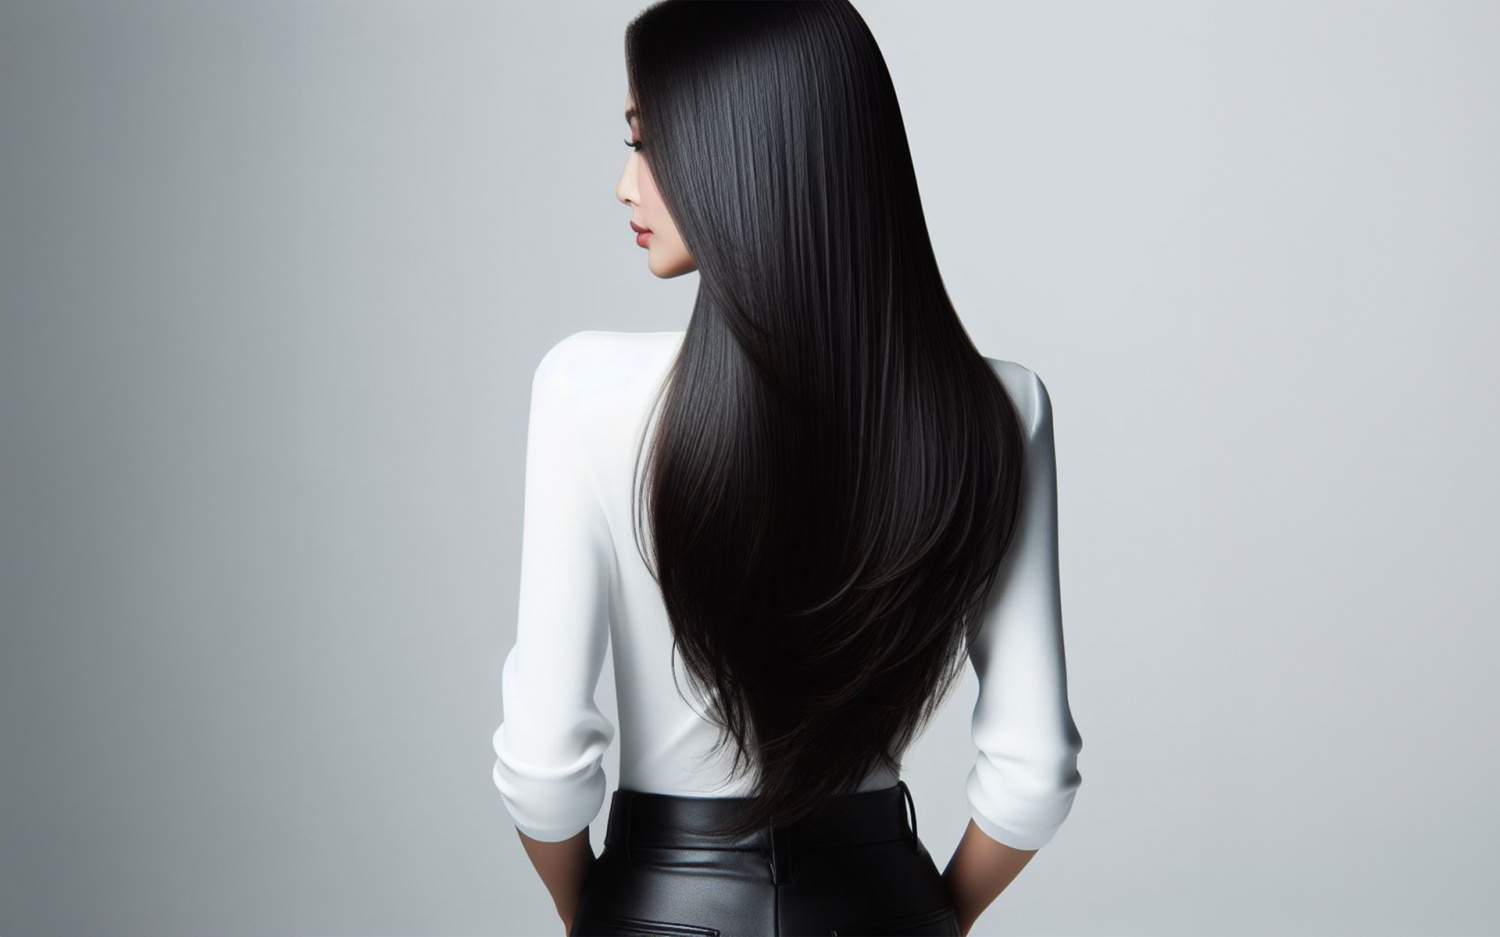 Salon Treatments to Book for Flyaways and Frizz